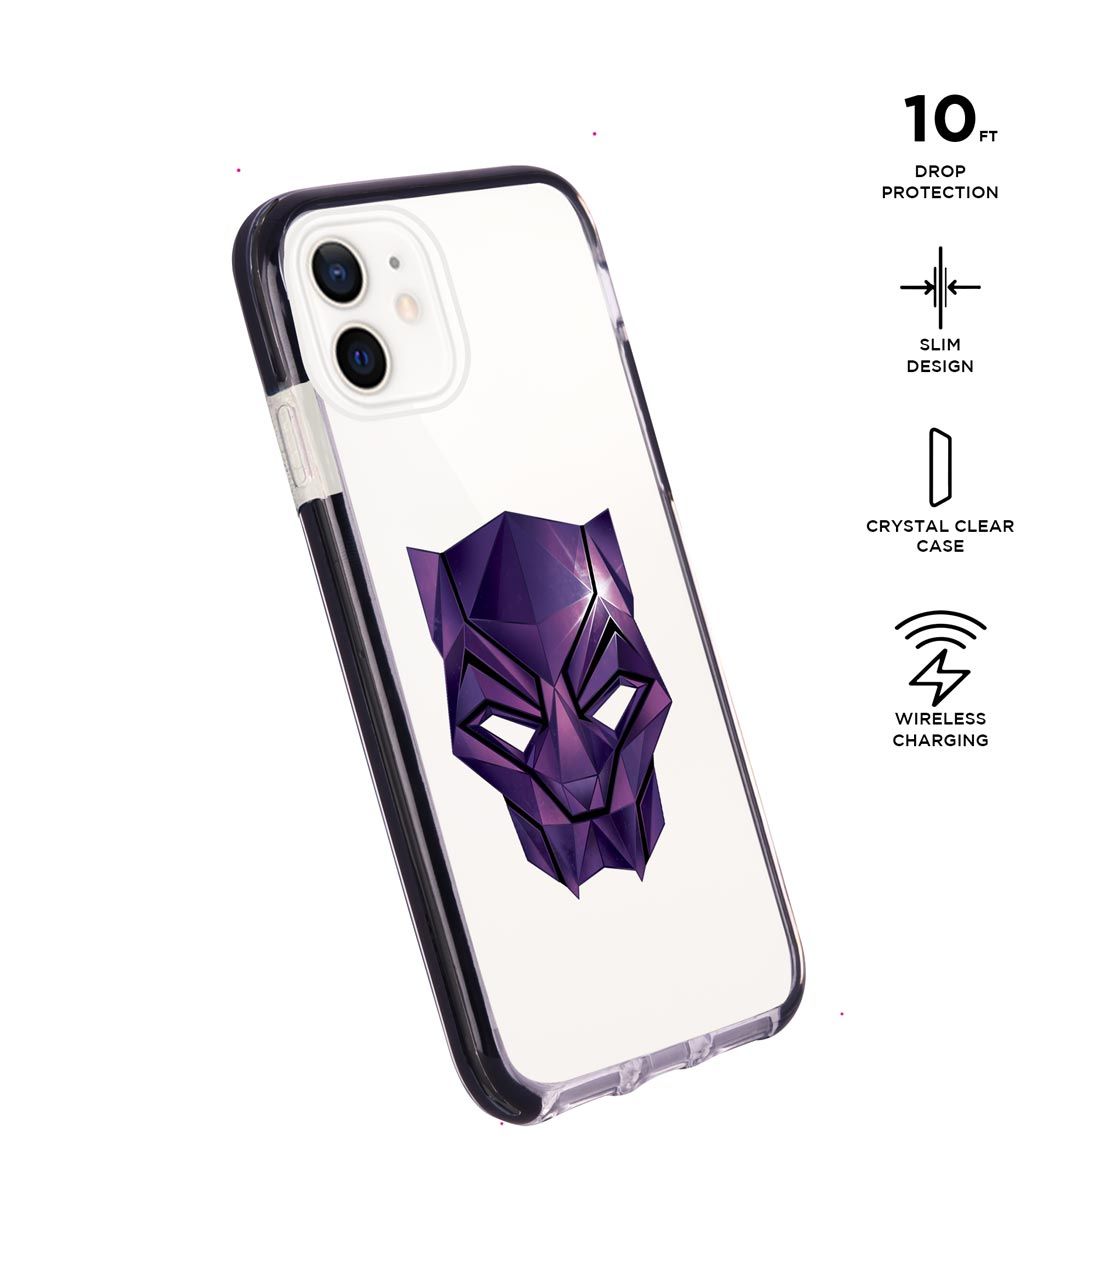 Black Panther Logo - Extreme Case for iPhone 12